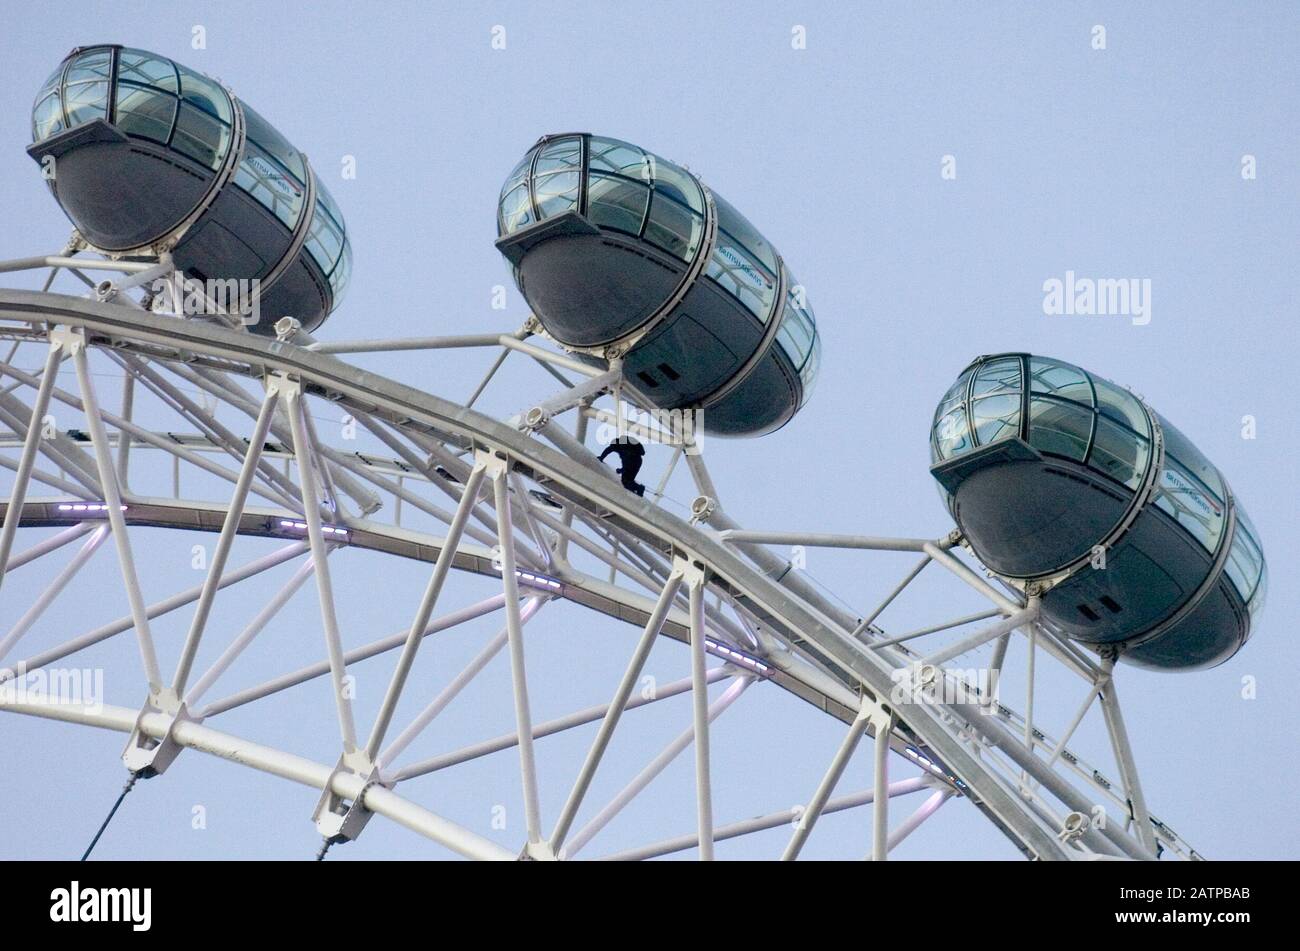 A base jumper leaping from the top of the London Eye at dawn in London 2006. Stock Photo